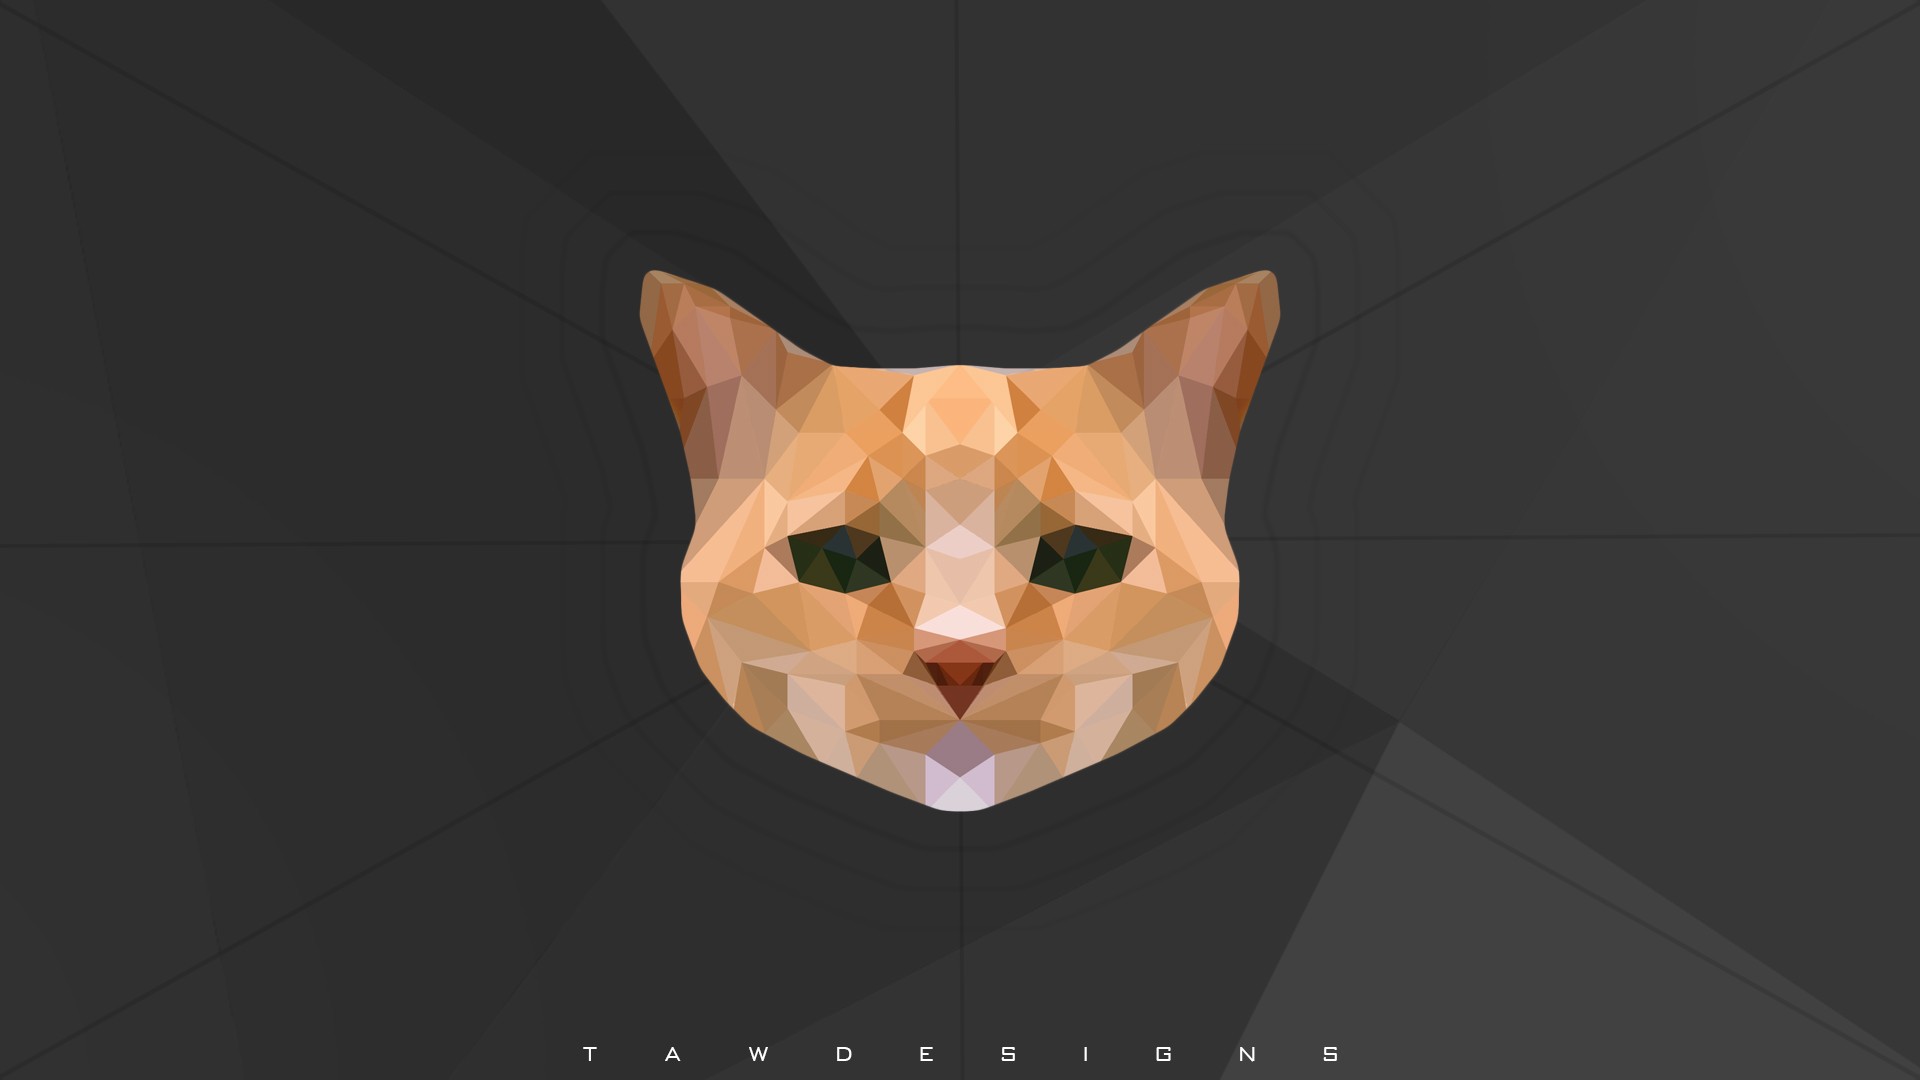 General 1920x1080 cats photo manipulation low poly animals gray beige gray background text mammals abstract